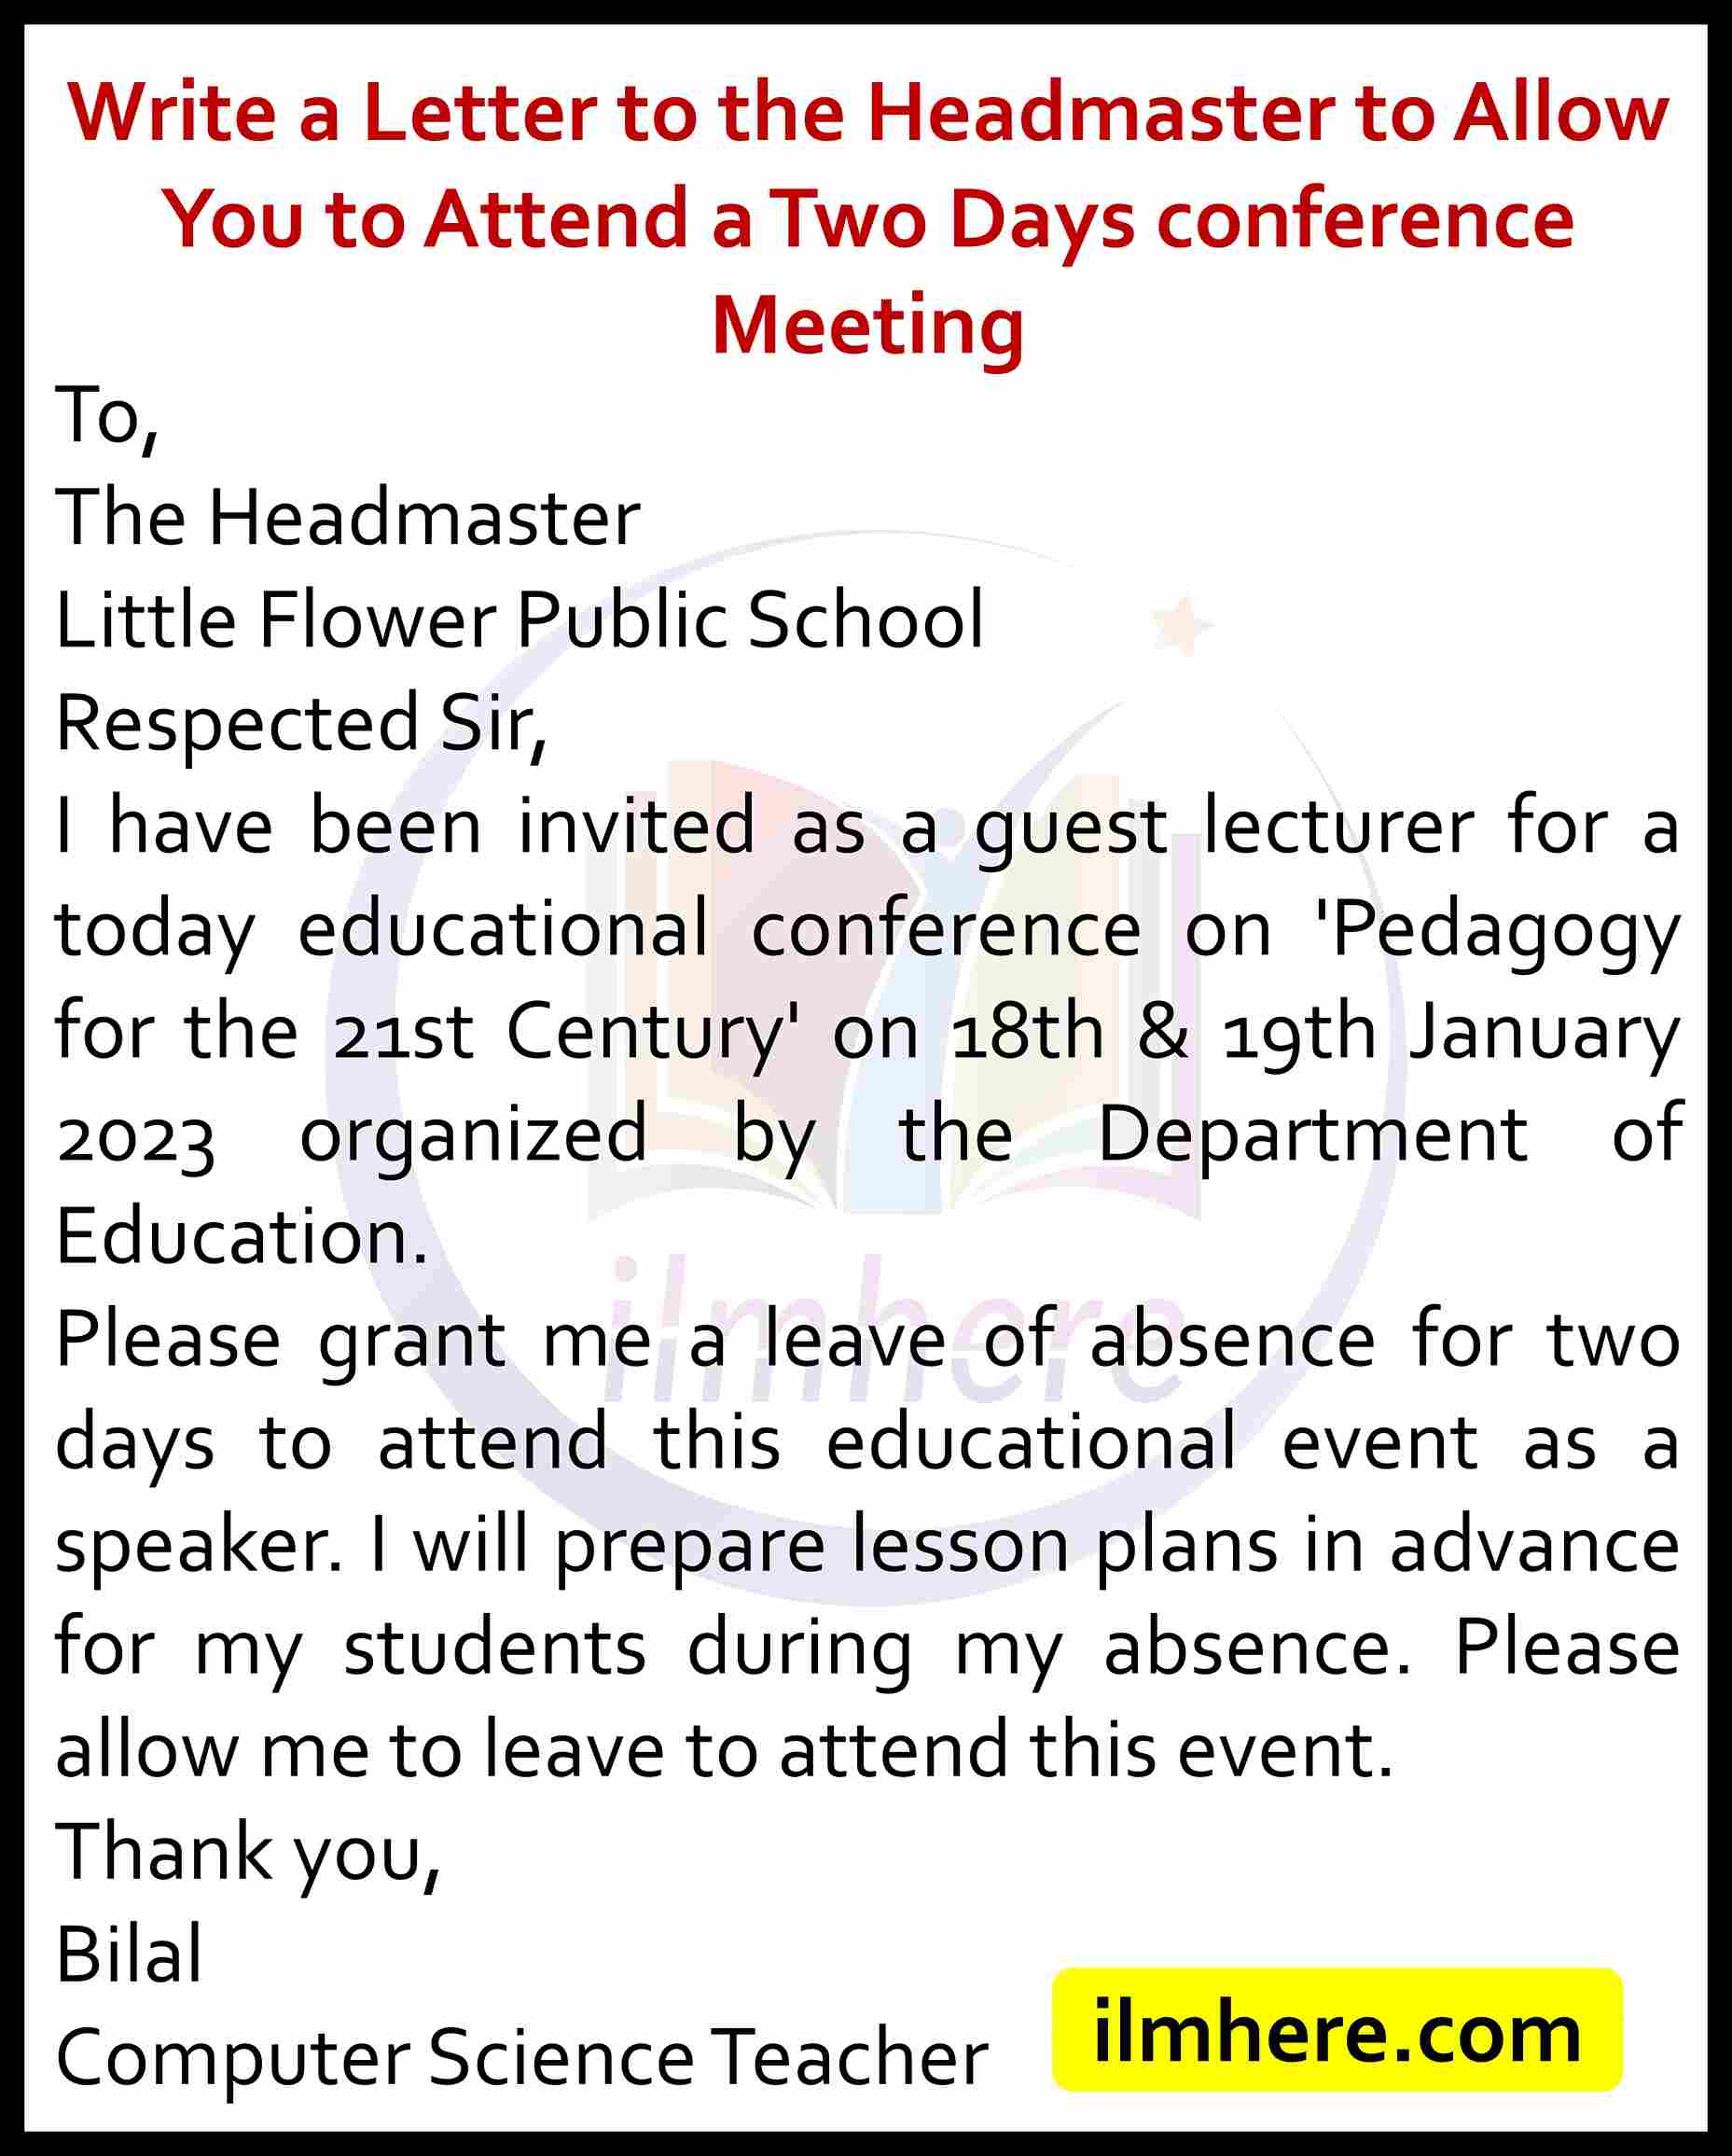 Write a Letter to the Headmaster to Allow You to Attend a Two Days conference Meeting